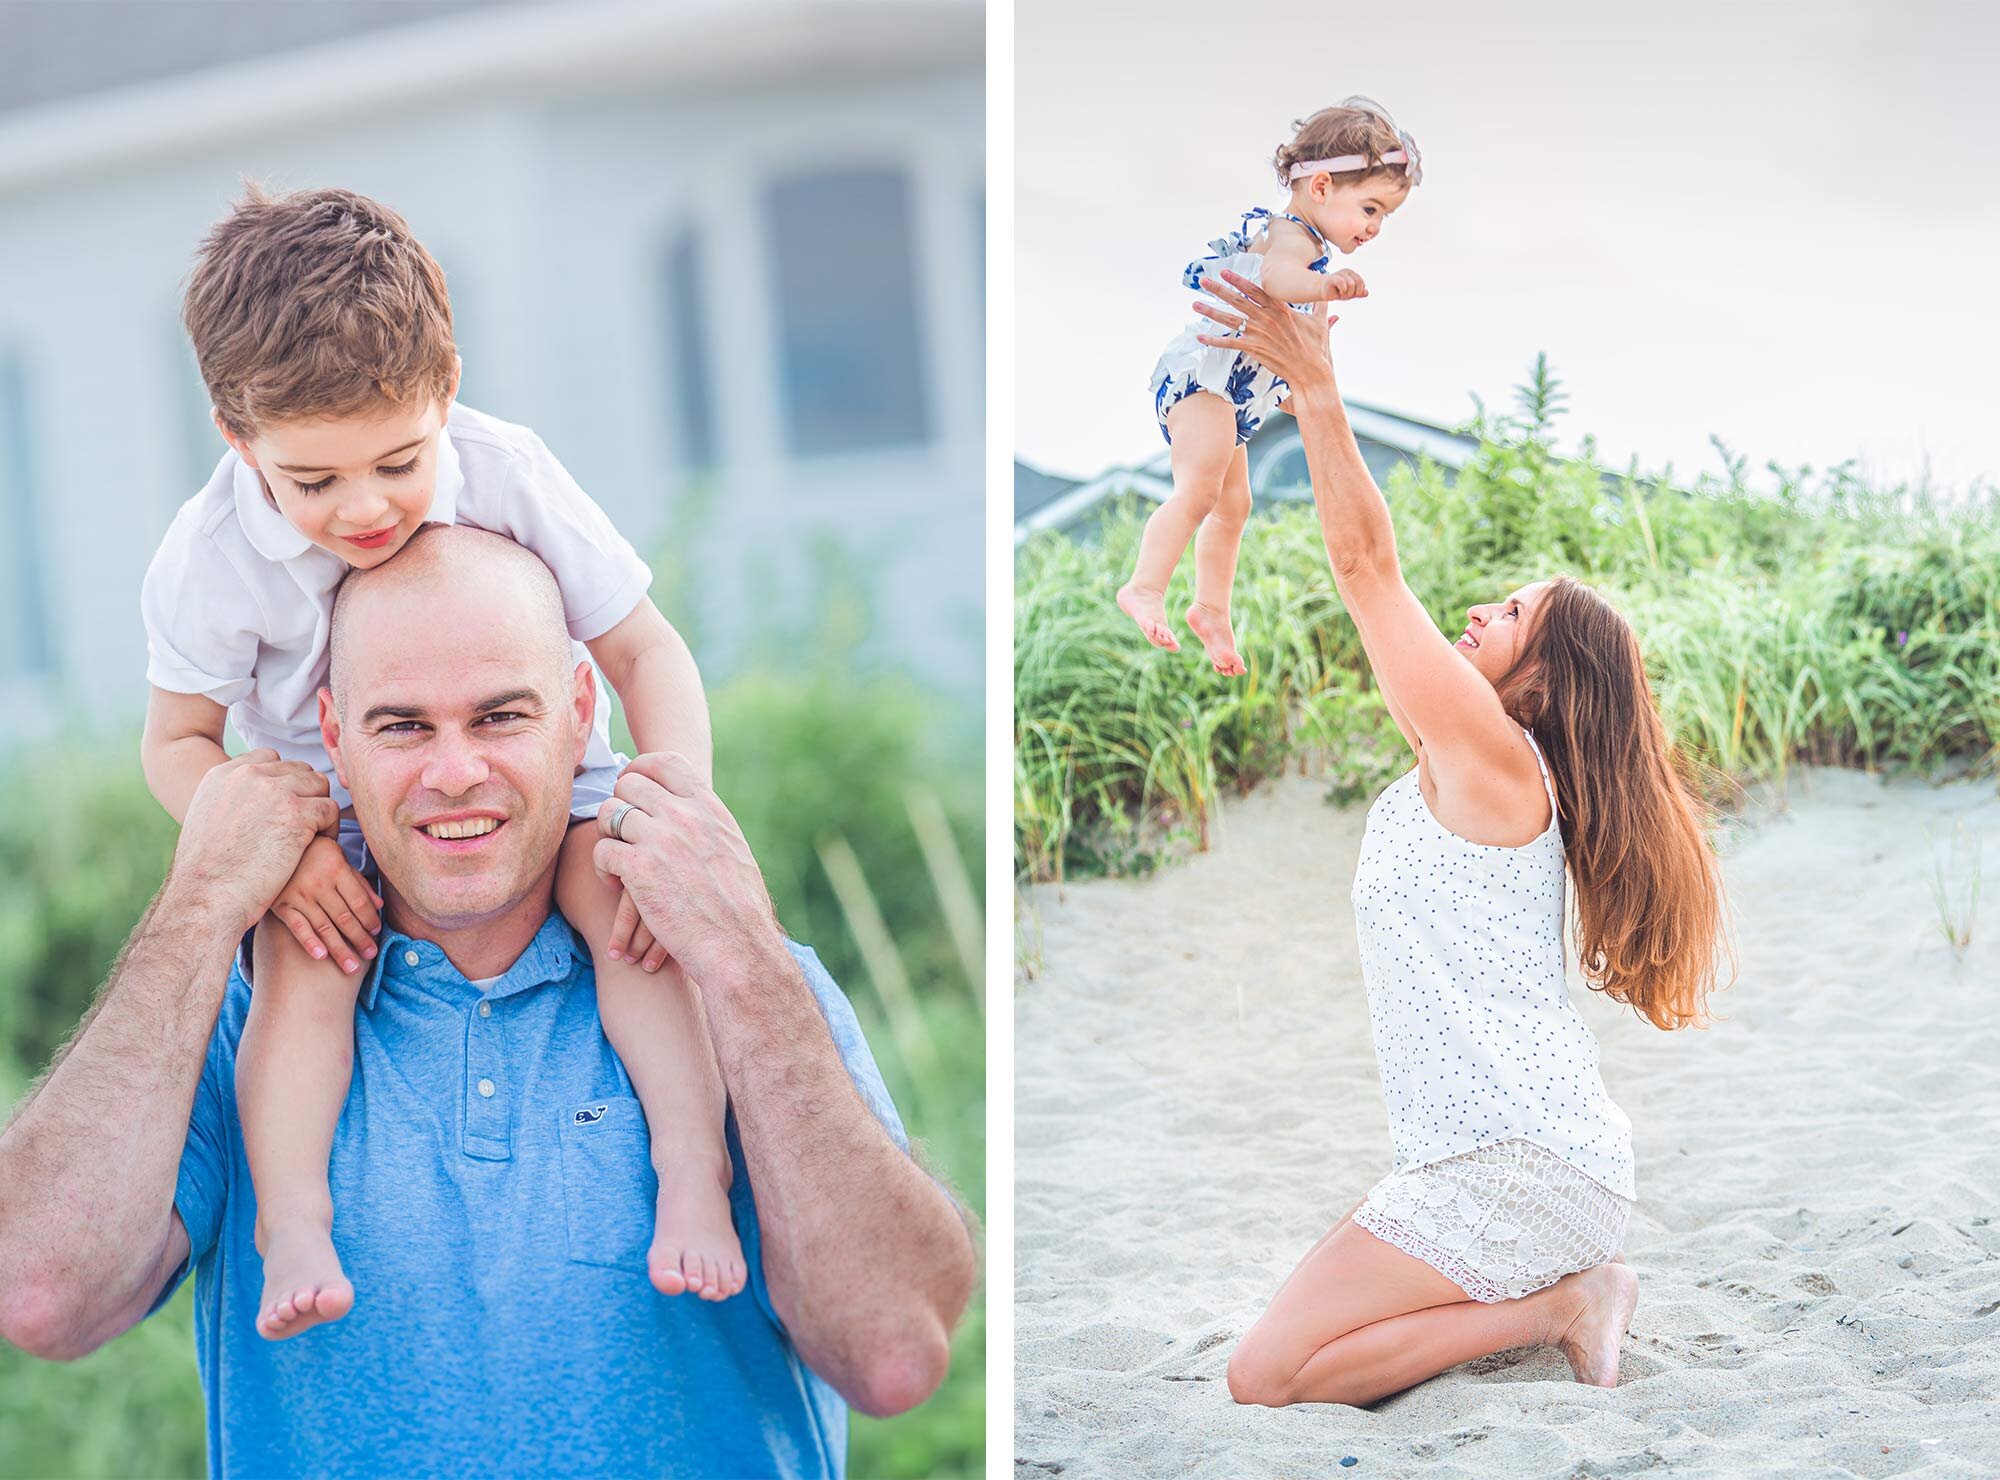 Plum Island Family Picture Photographer | Stephen Grant Photography